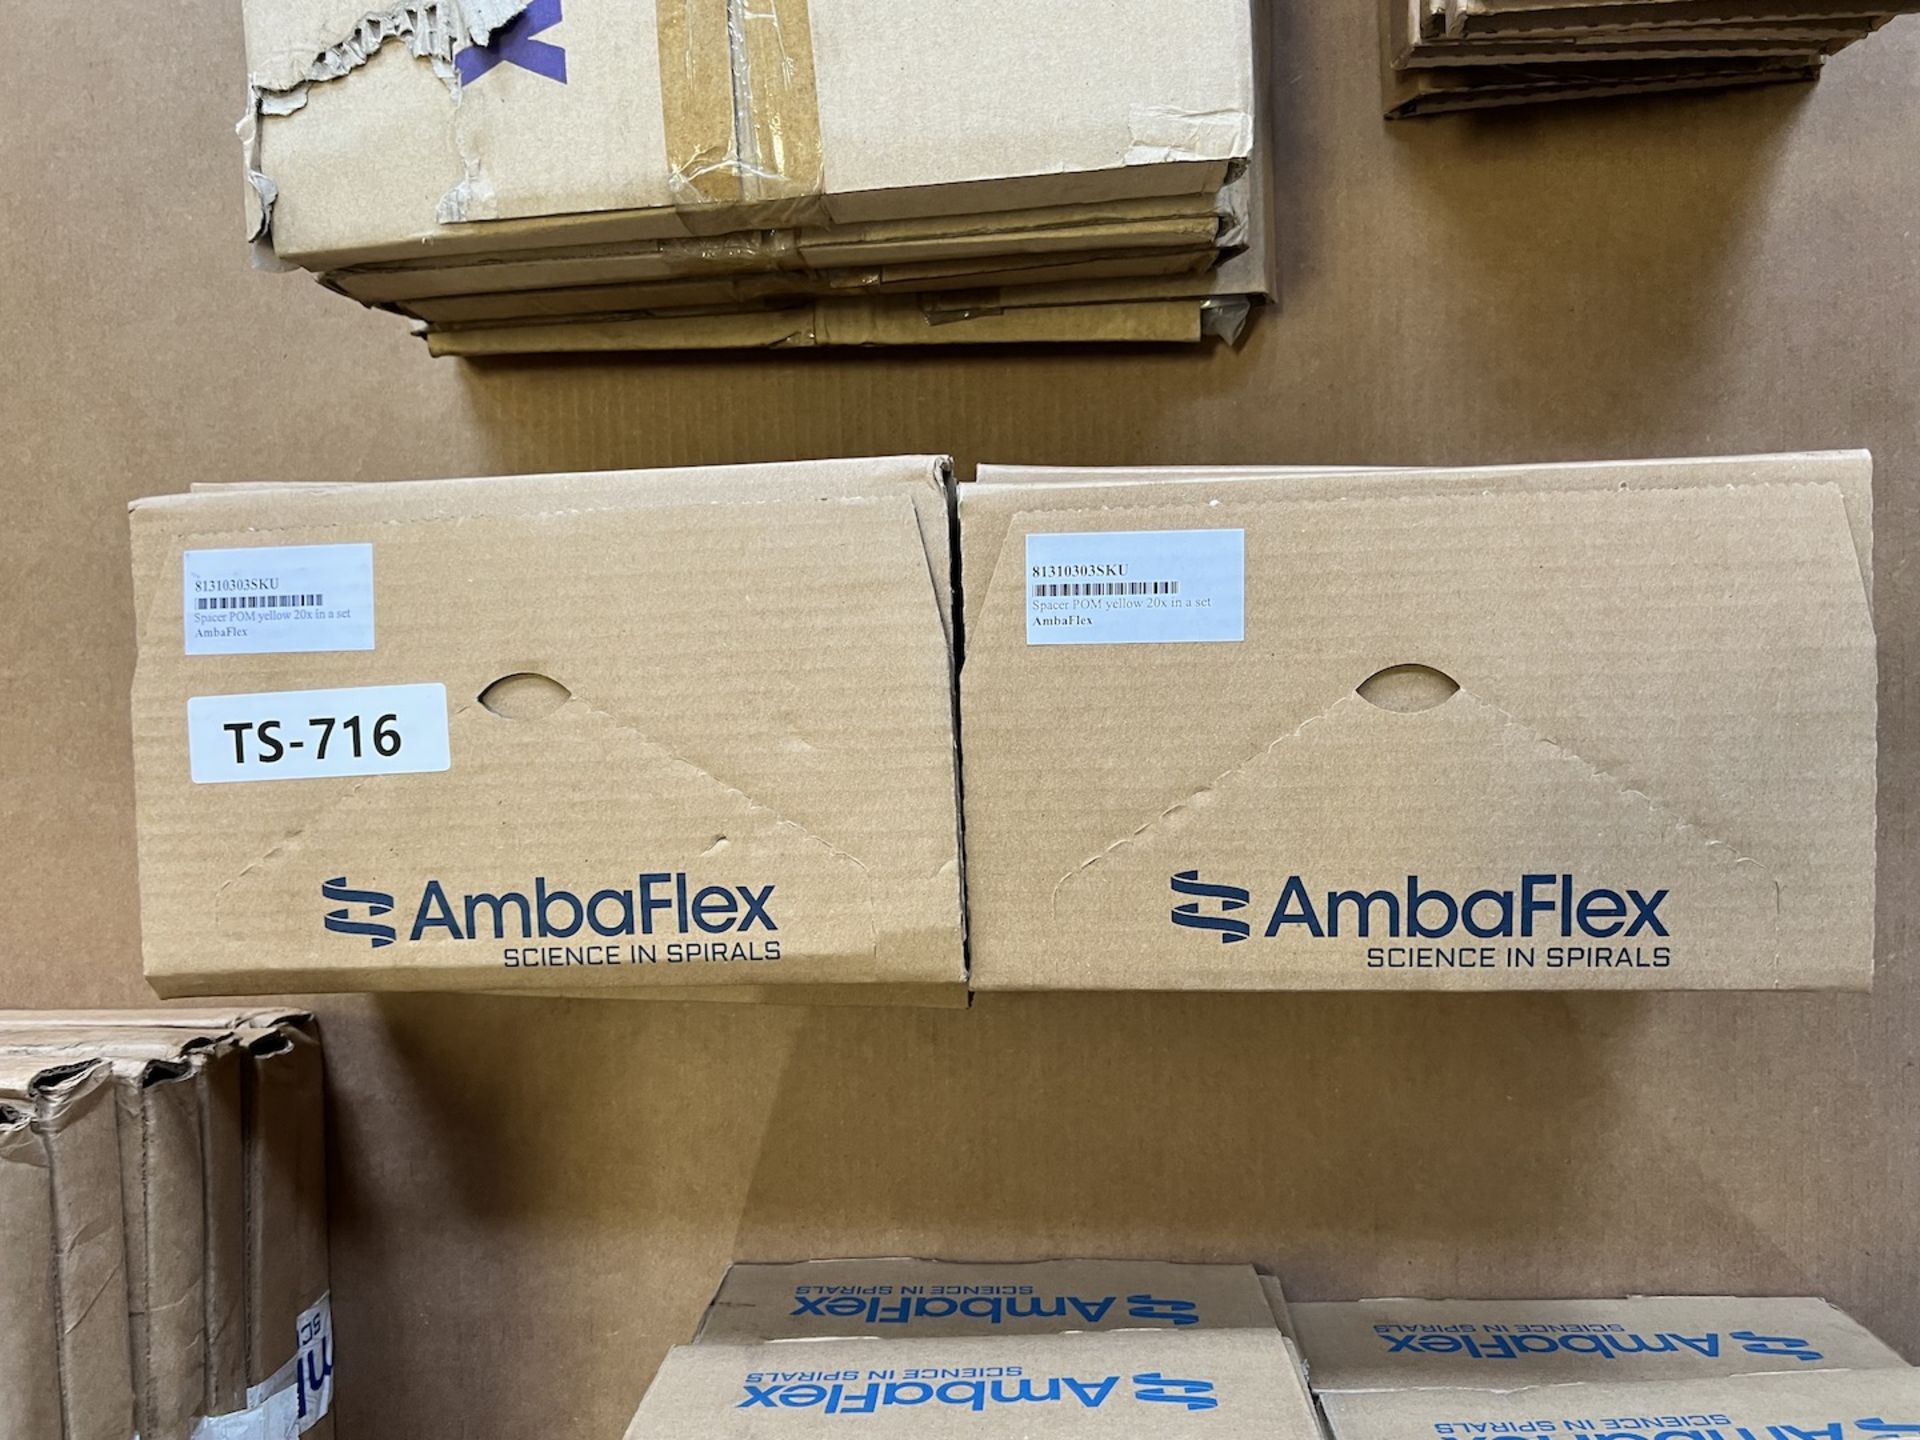 (22) Boxes of New Ambaflex Sidebow Chain, 3/4", # 81500099SKU, 5 Meter Box, (6) Boxes of New - Image 9 of 14